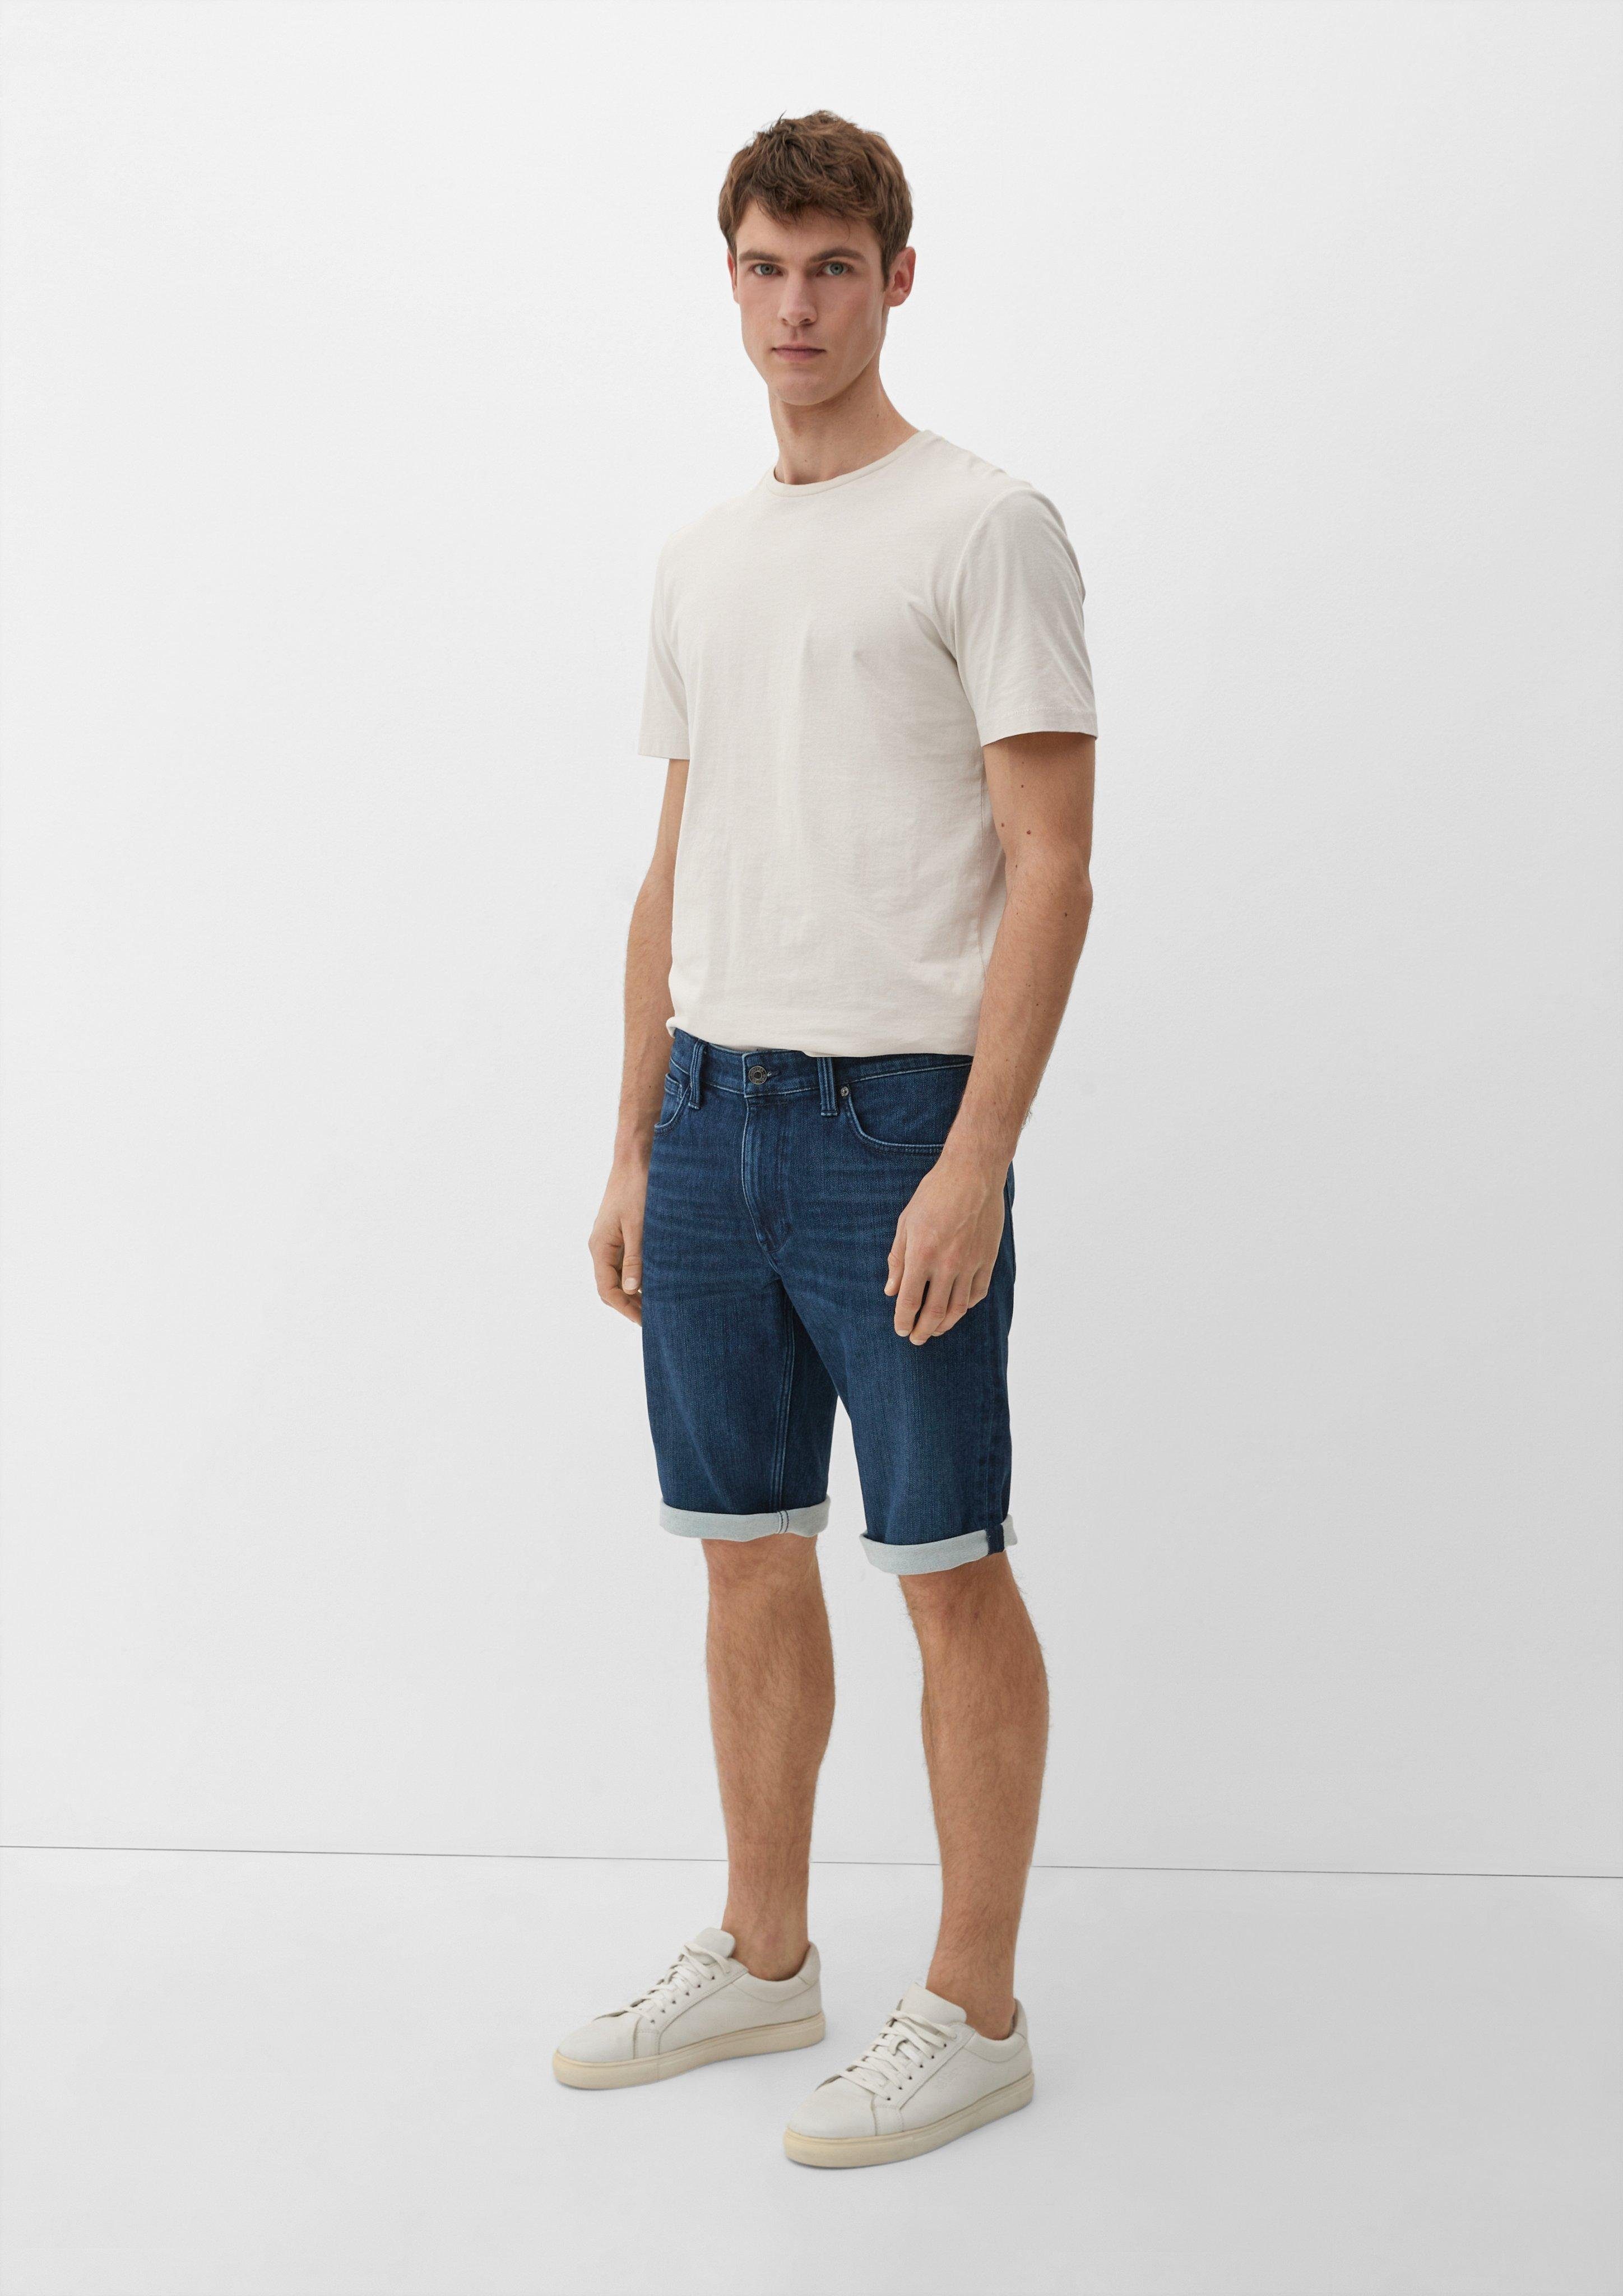 Straight / Jeansshorts Waschung Mid Regular / Leg Jeans-Shorts s.Oliver / Rise Fit